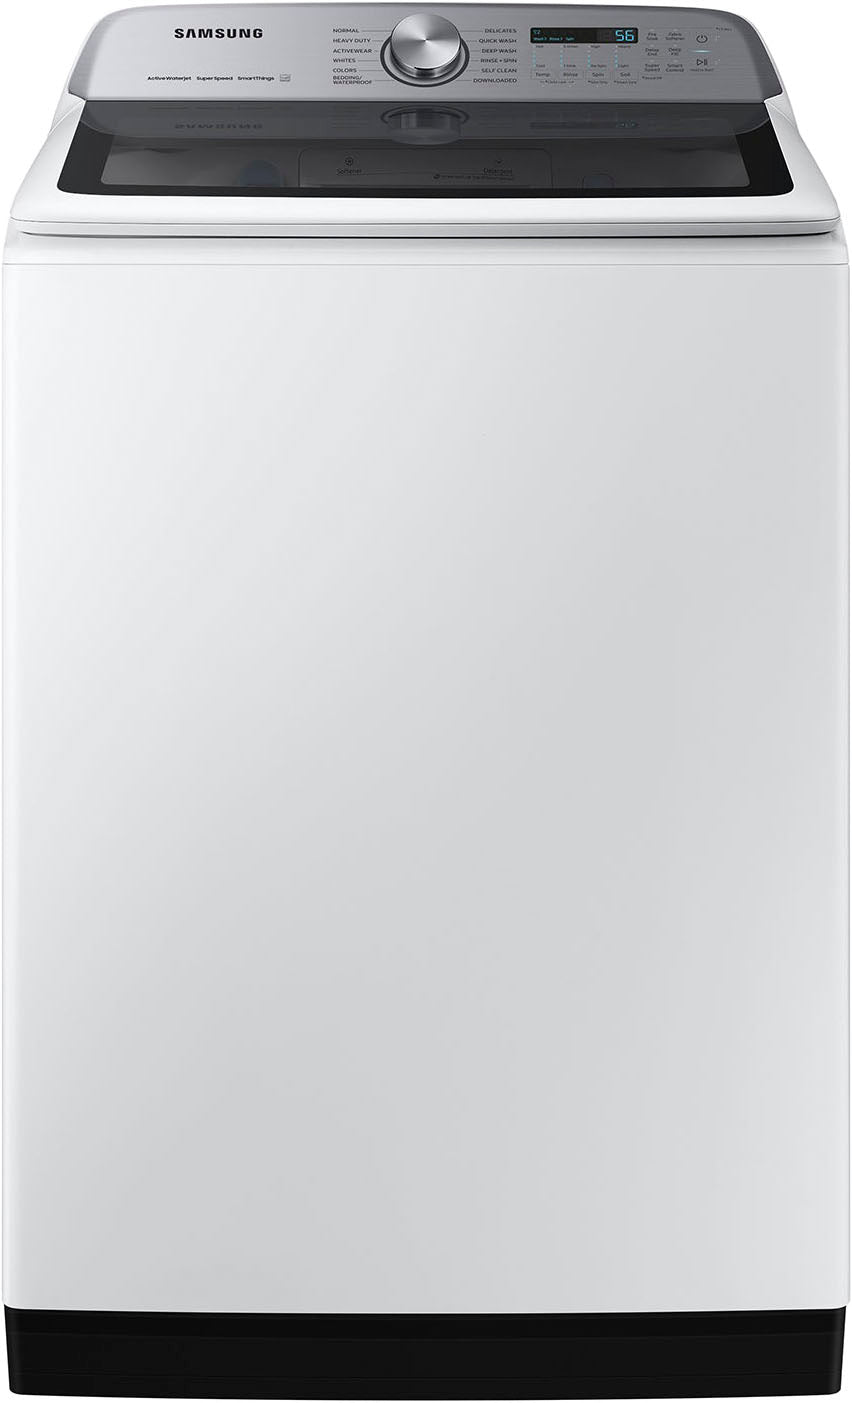 Samsung - 5.5 cu. ft. High-Efficiency Smart Top Load Washer with Super Speed Wash - White_0